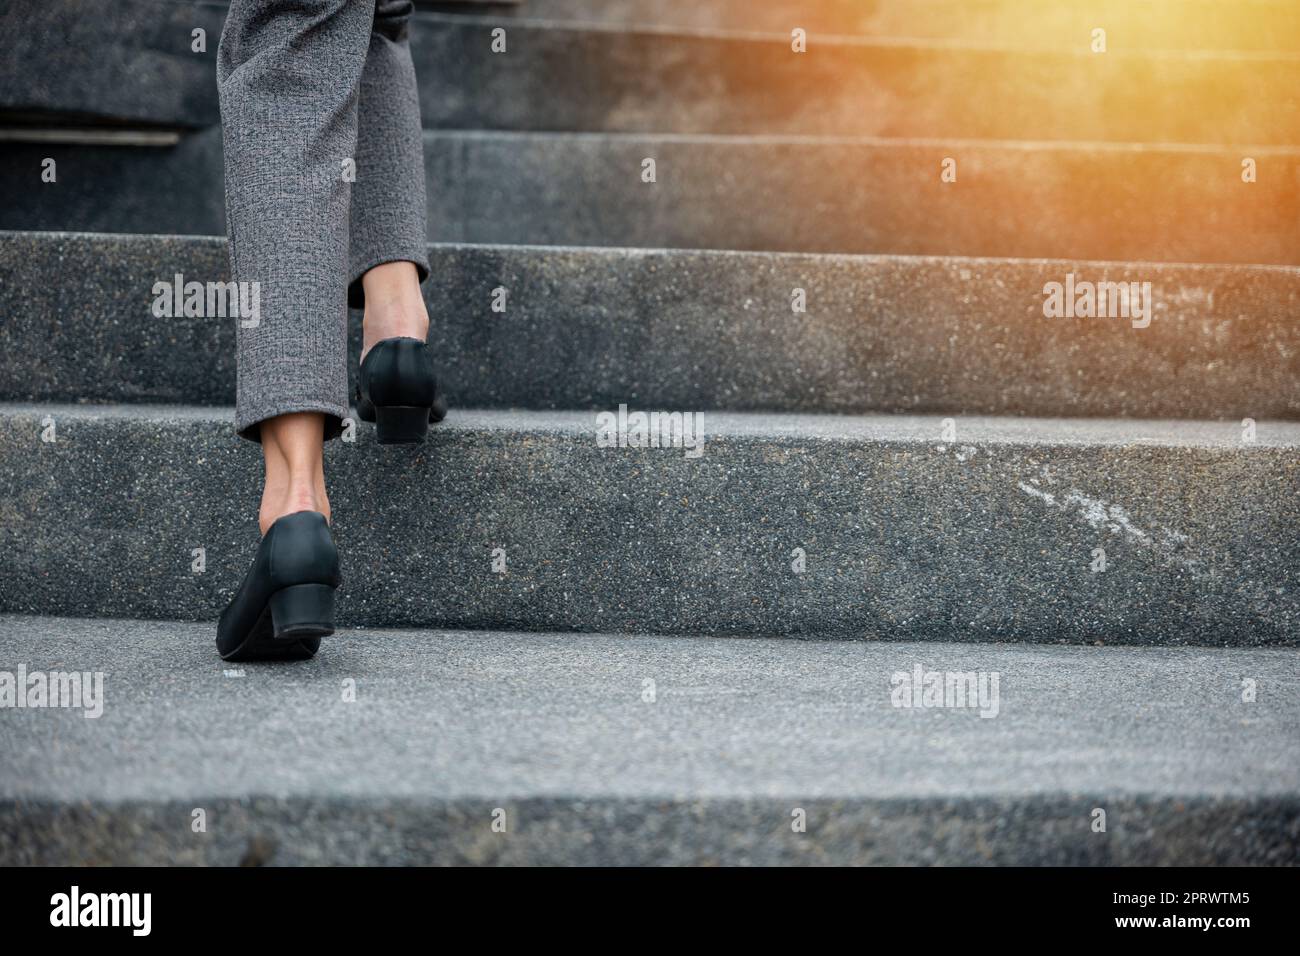 Closeup legs of businesswoman hurry up walking on stairway Stock Photo